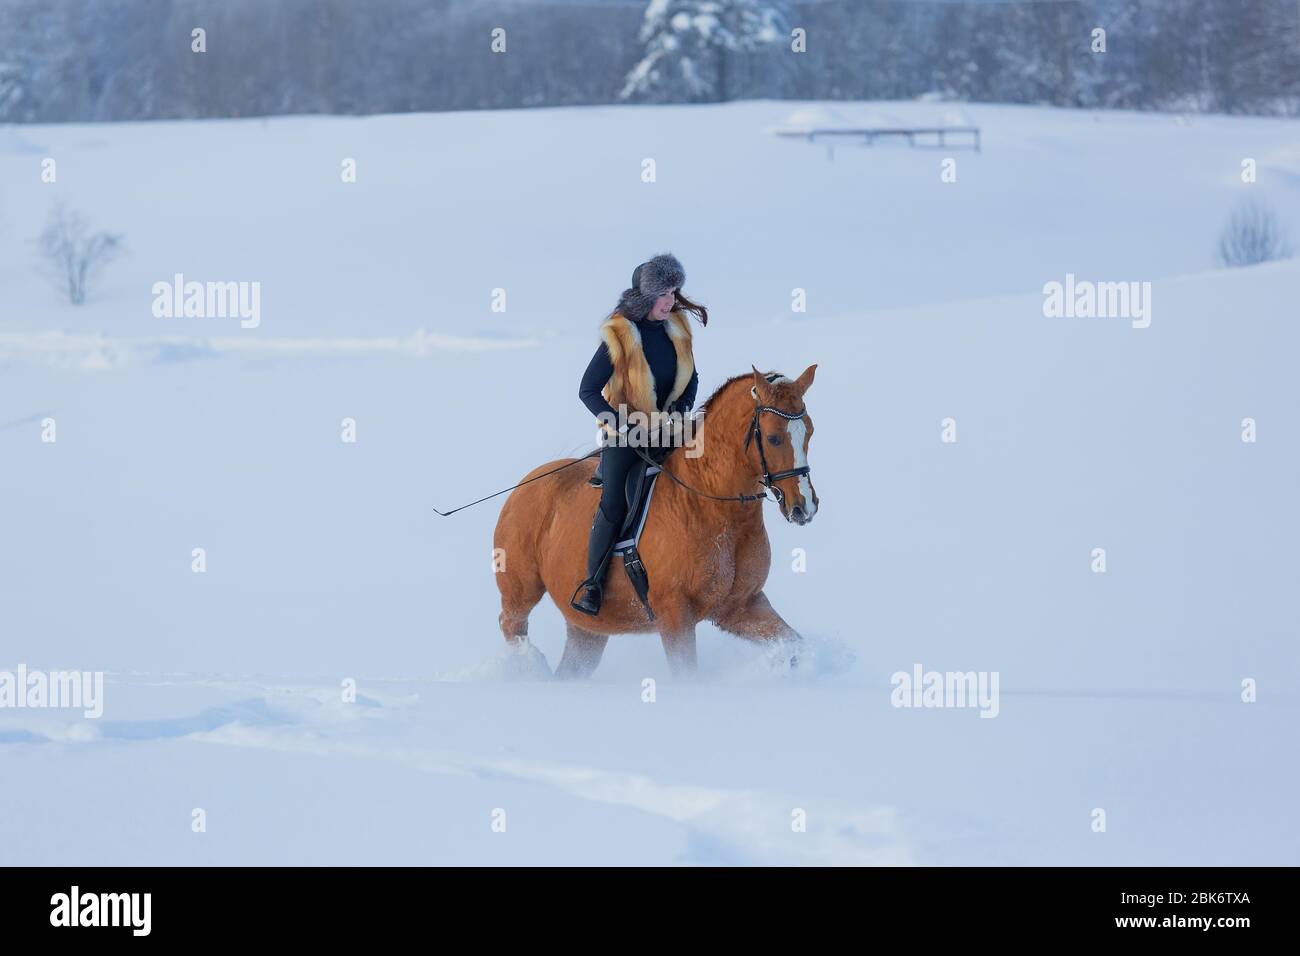 Young woman riding her Don horse through snow on a winter day Stock Photo